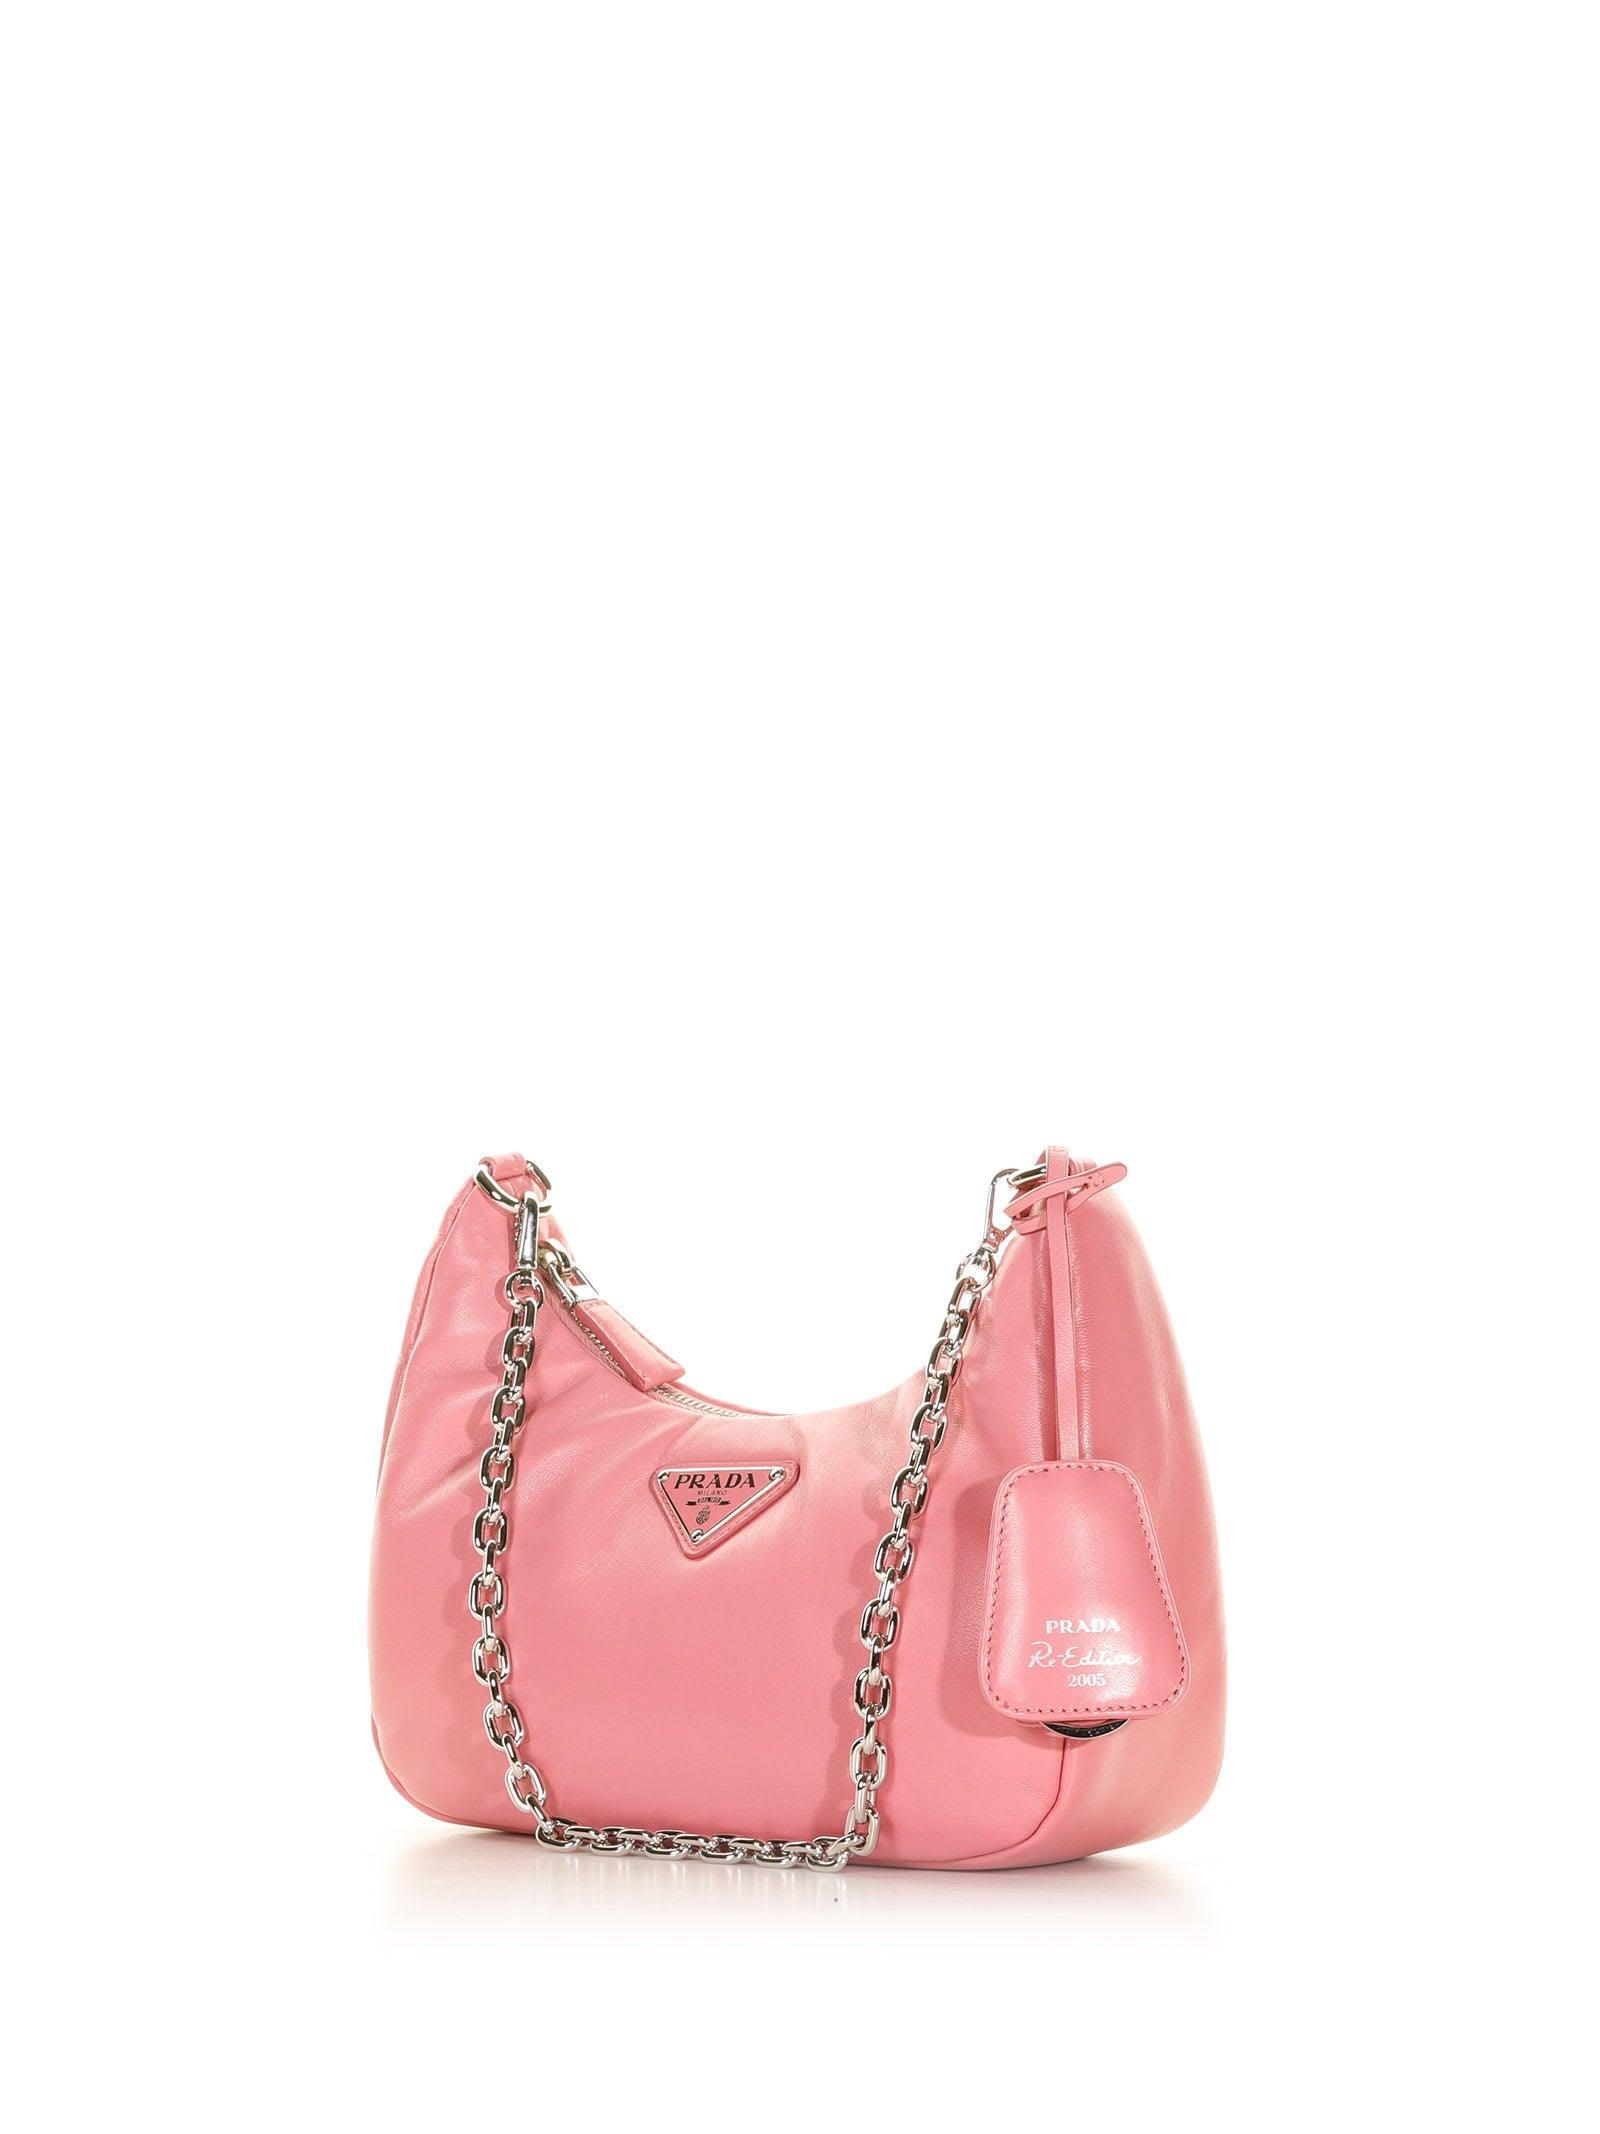 Prada Padded Nappa-leather Re-edition 2005 Shoulder Bag in Pink